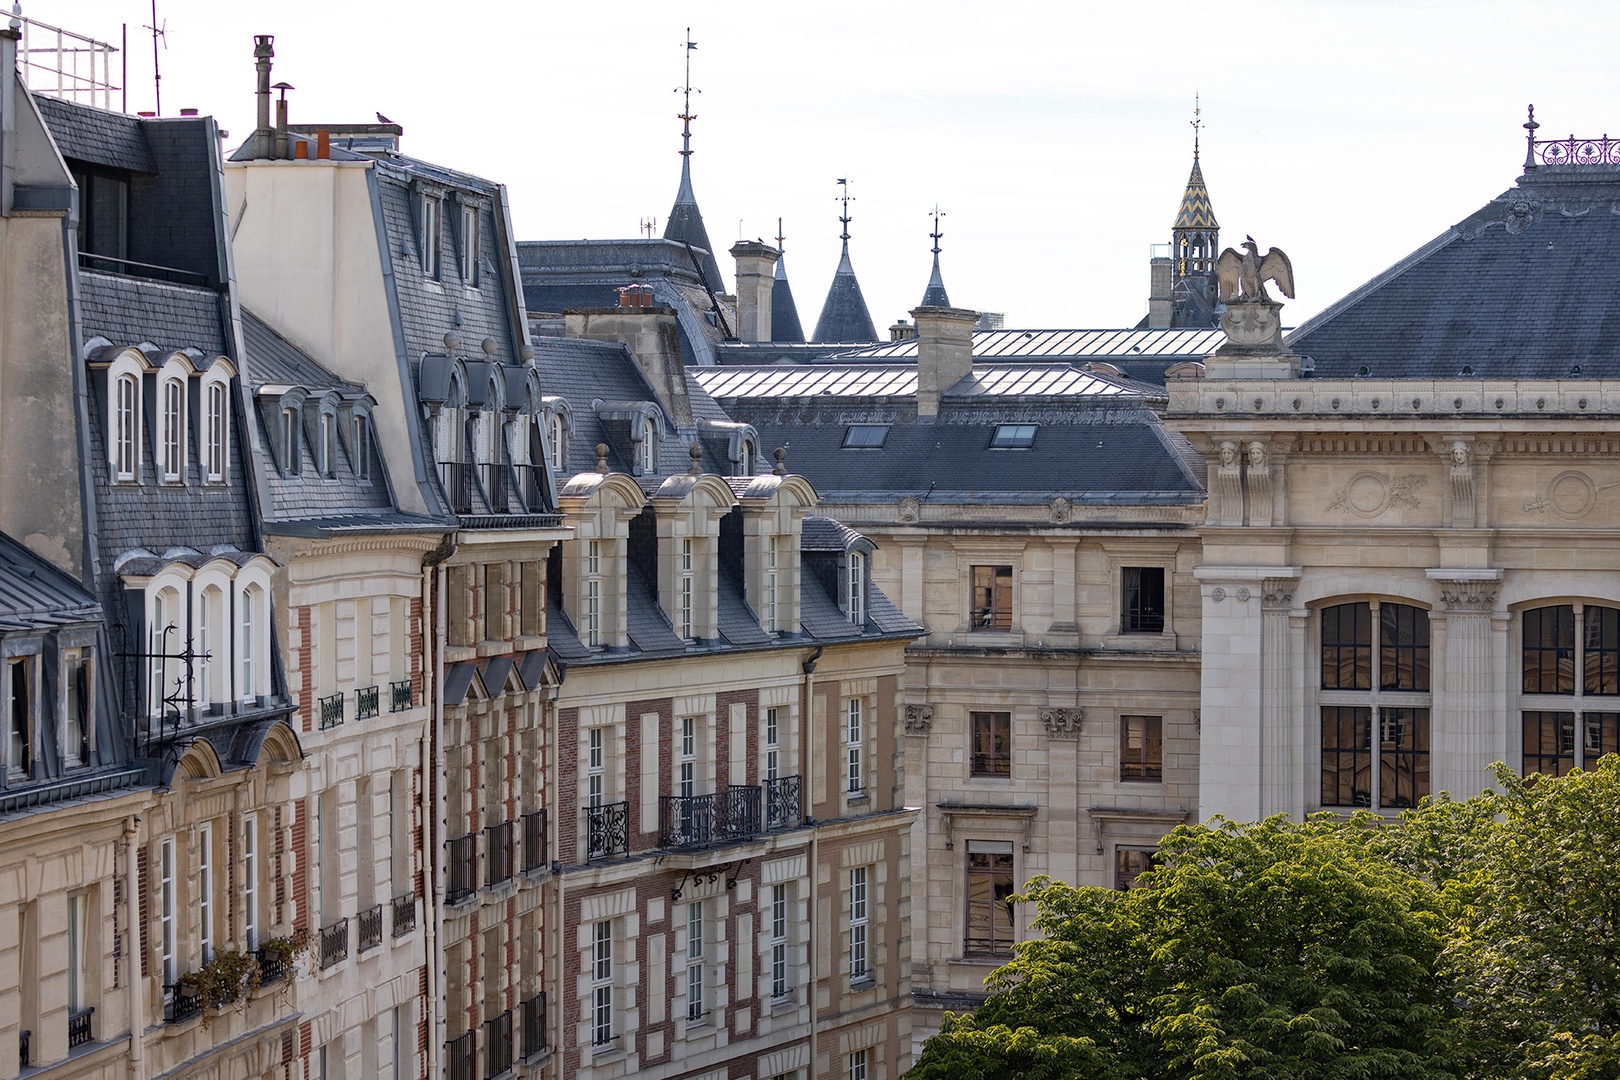 Views of the rooftops surrounding Place Dauphine and the spires of Conciergerie.